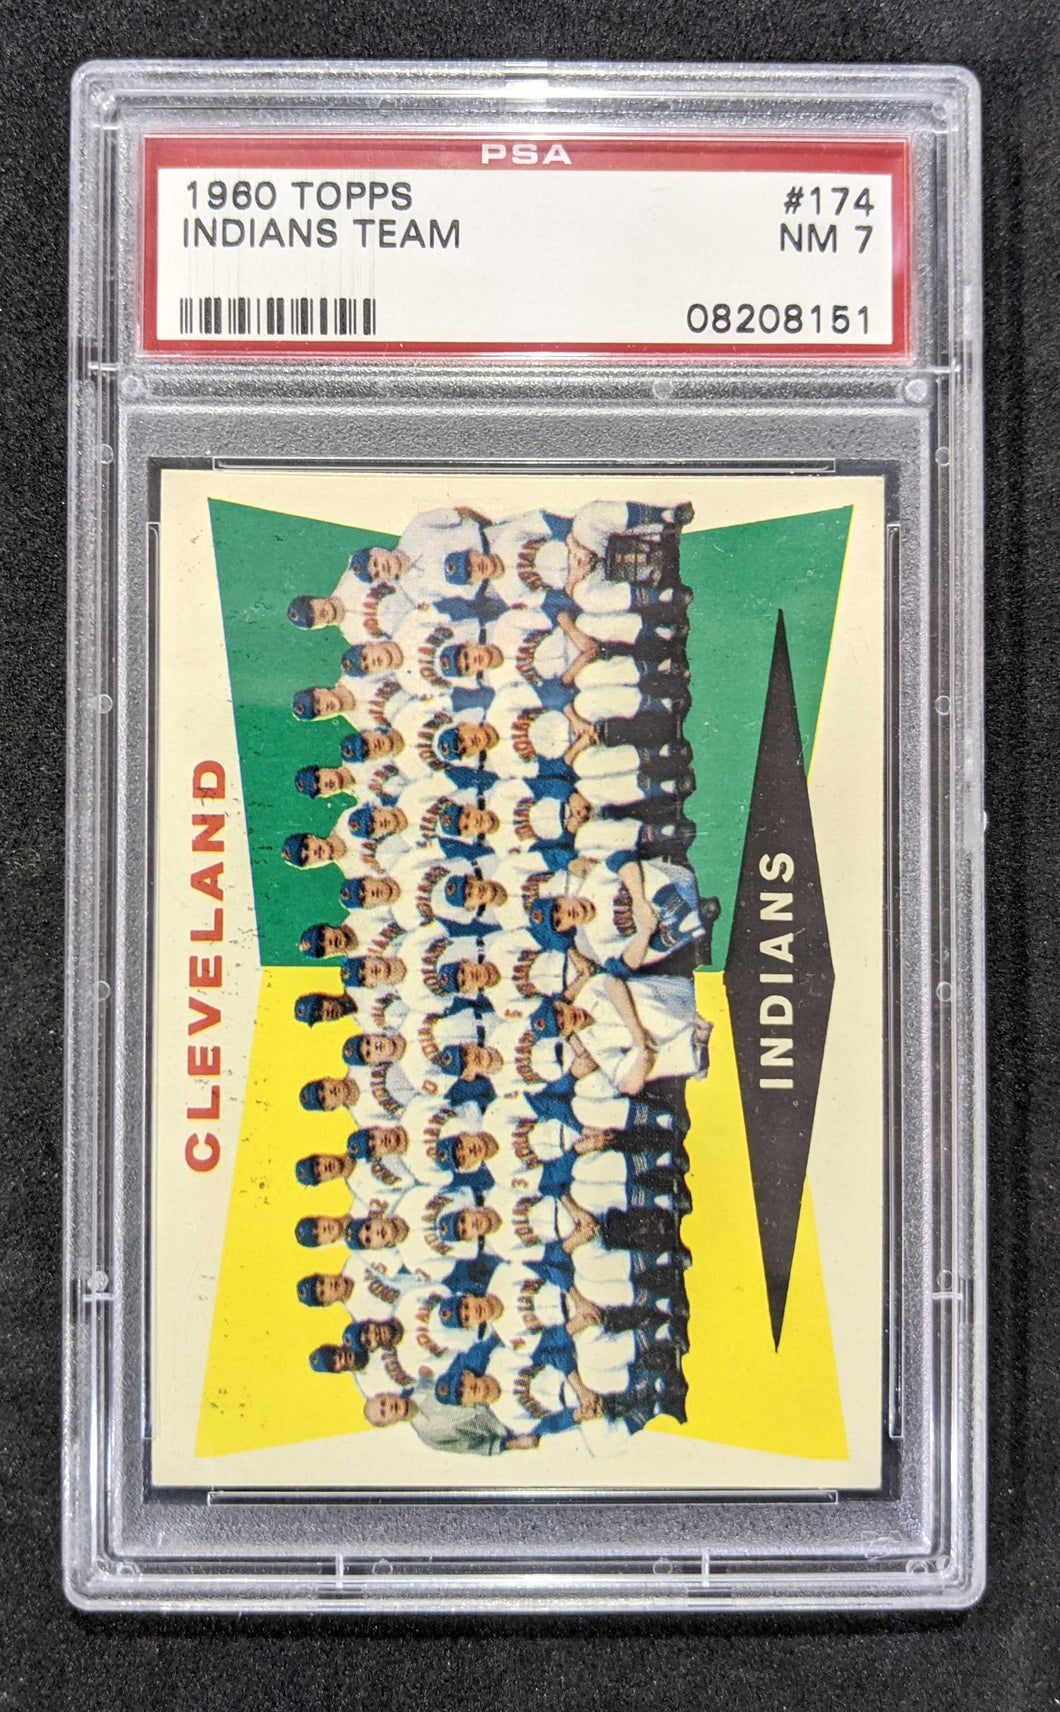 1960 Topps Indians Team #174 PSA NM 7 (Well Centered)